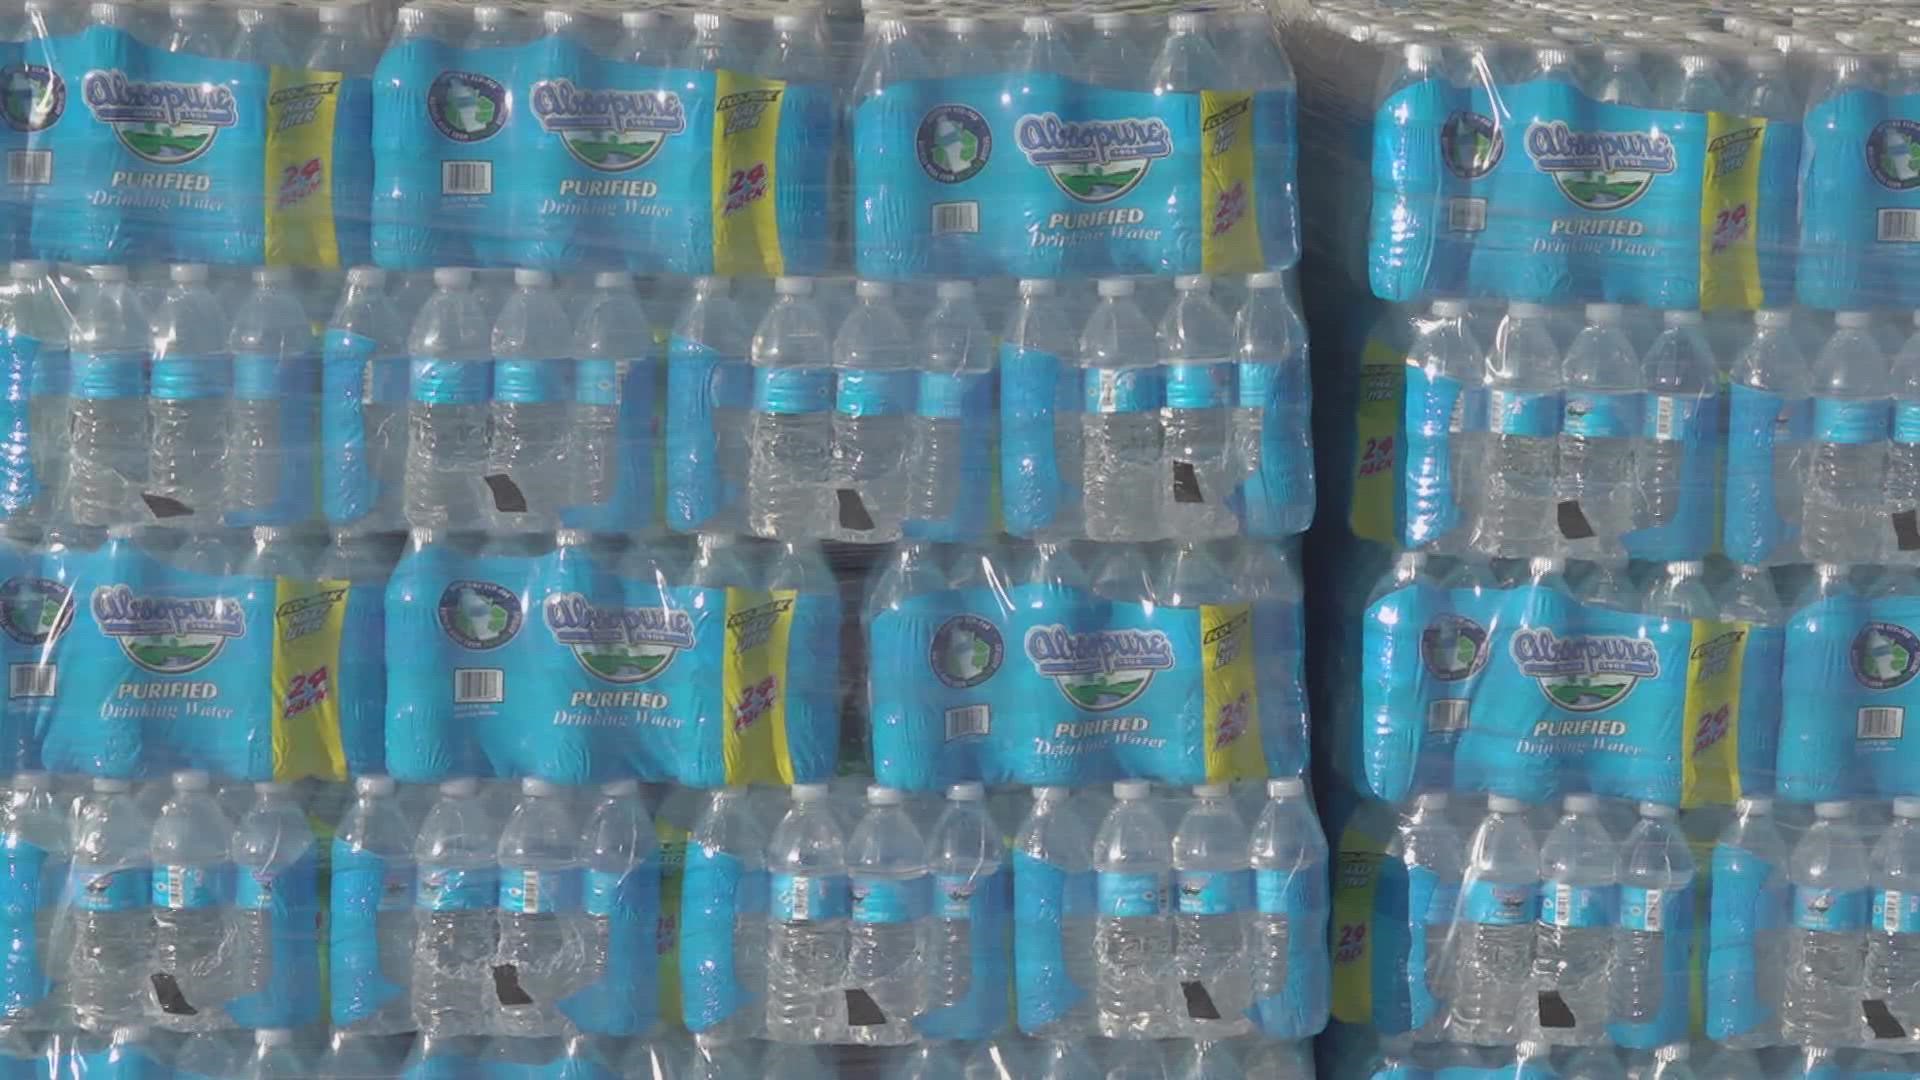 Big Horn Supply usually sells cases of water at its store, but decided to give them away during the boil water notice.